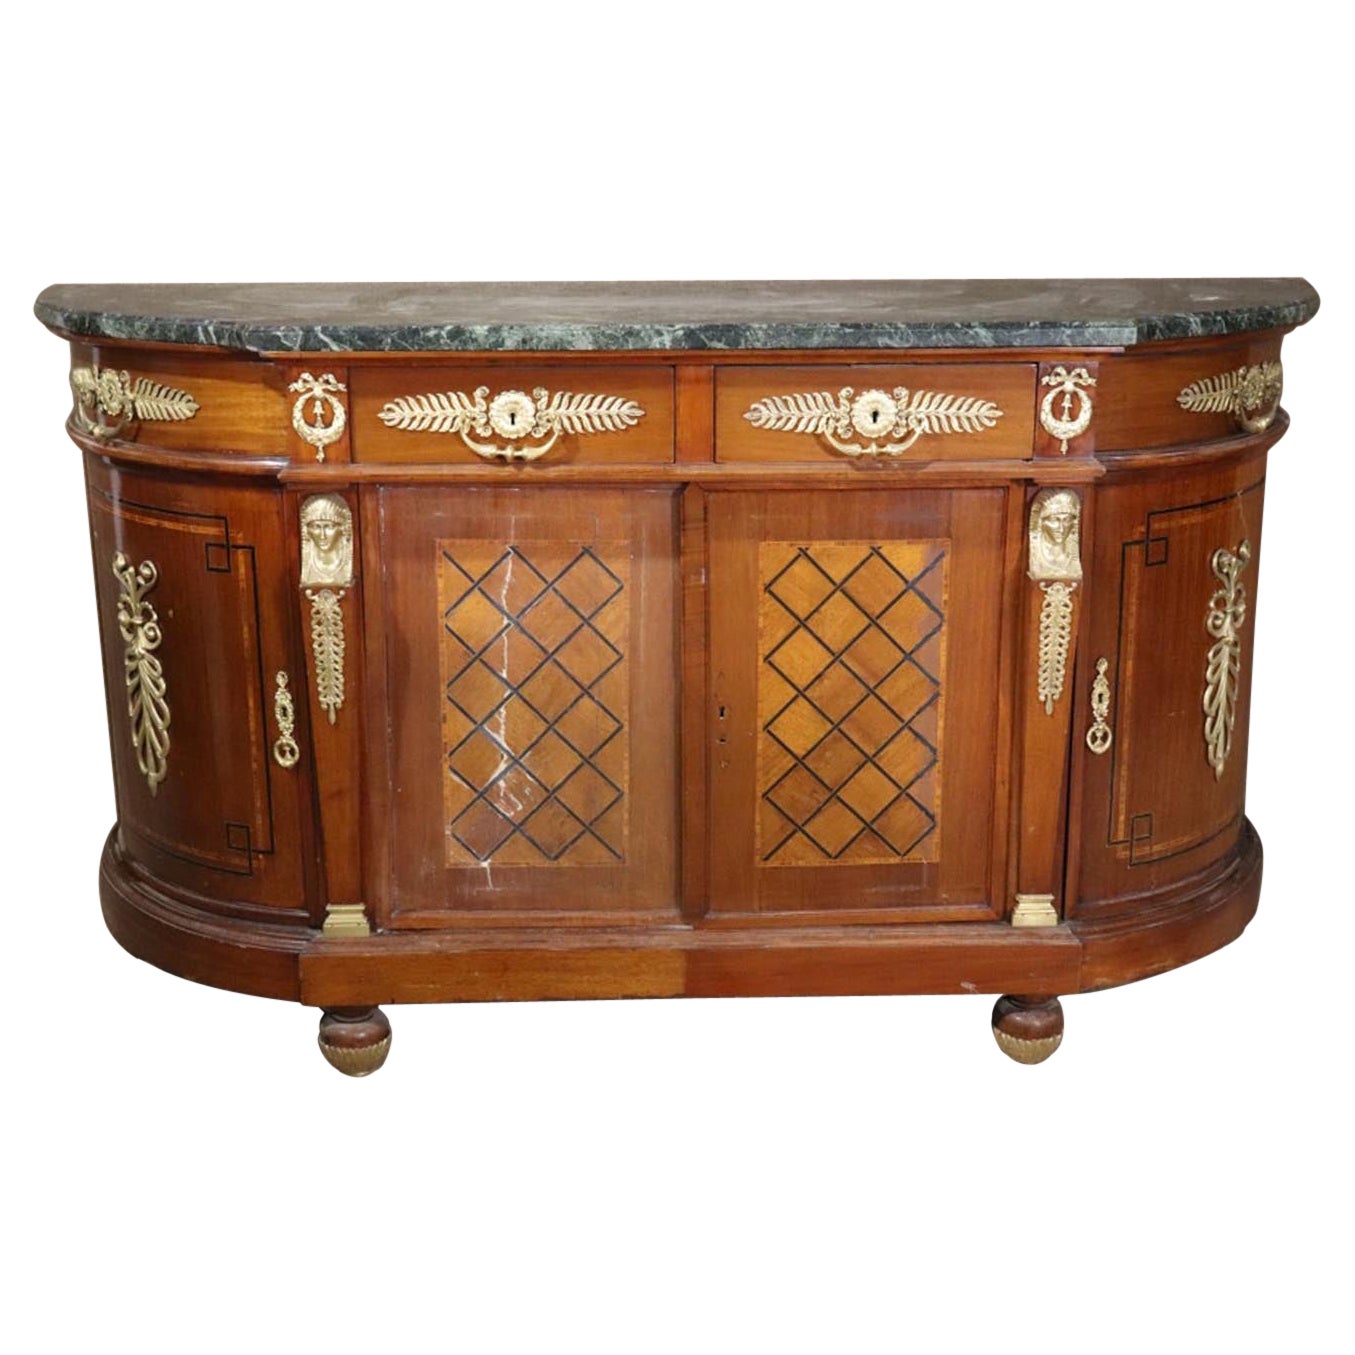 FRENCH EMPIRE MARBLE TOP FIGURAL BUFFET Circa 1890s